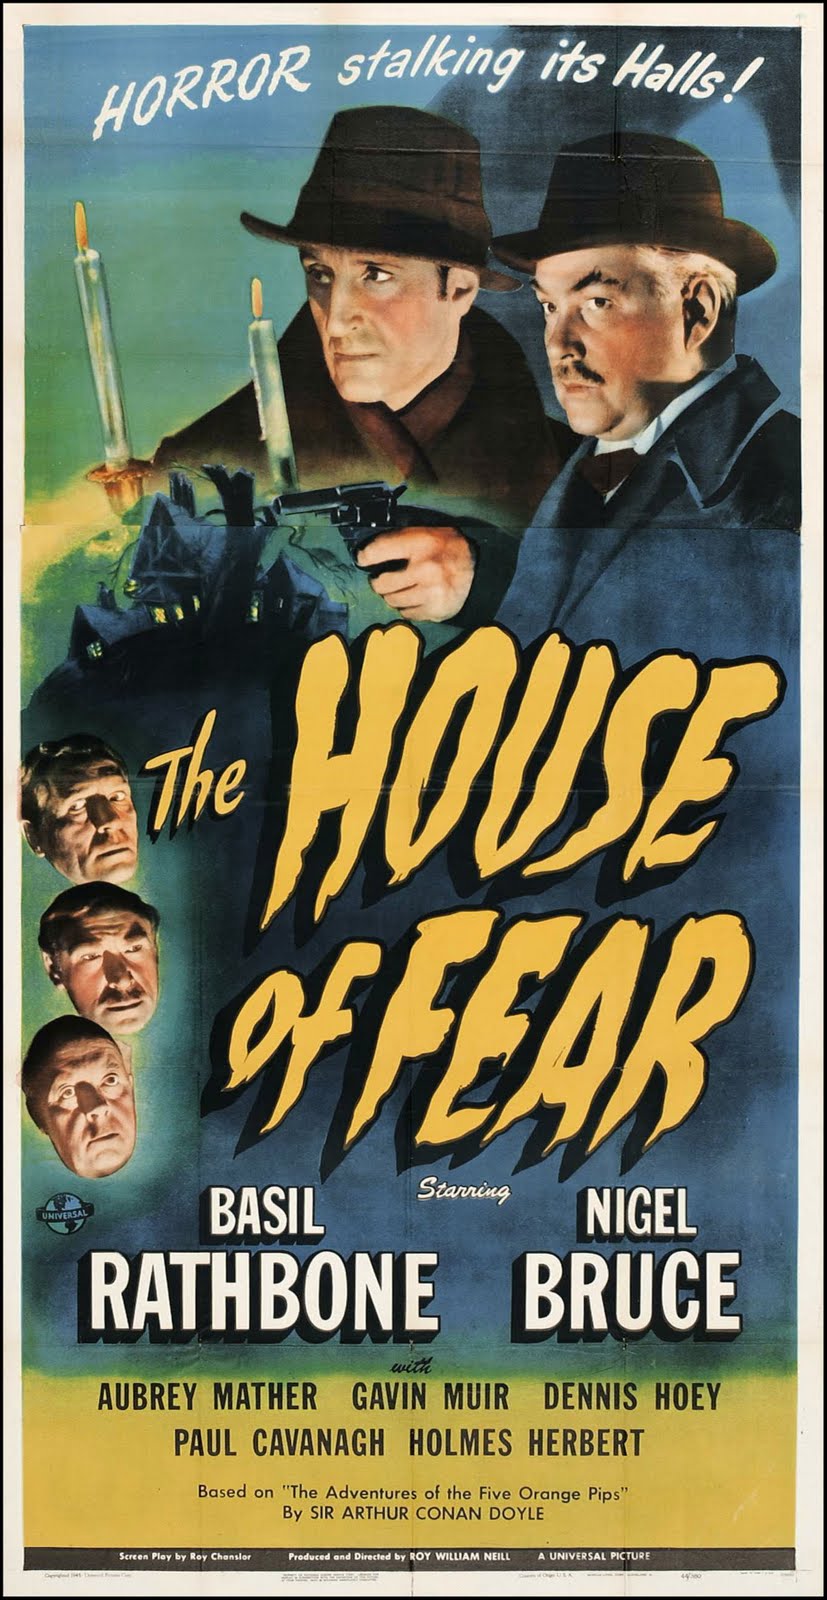 Sherlock Holmes And The House Of Fear [1945]